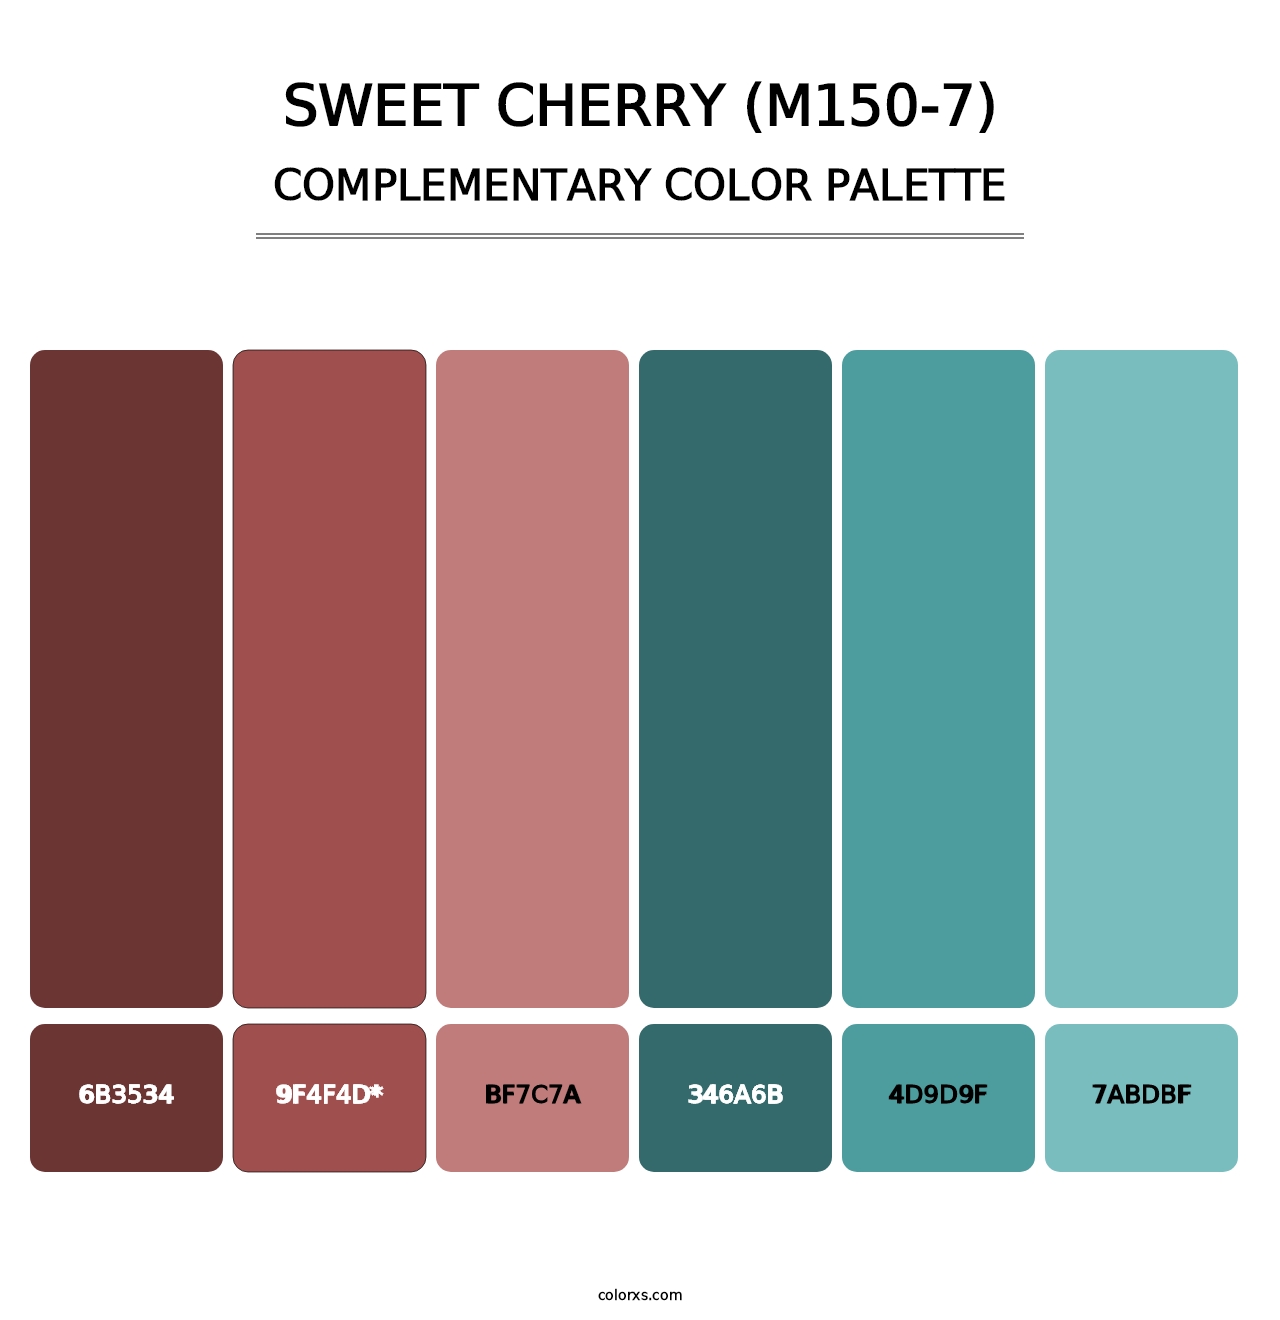 Sweet Cherry (M150-7) - Complementary Color Palette